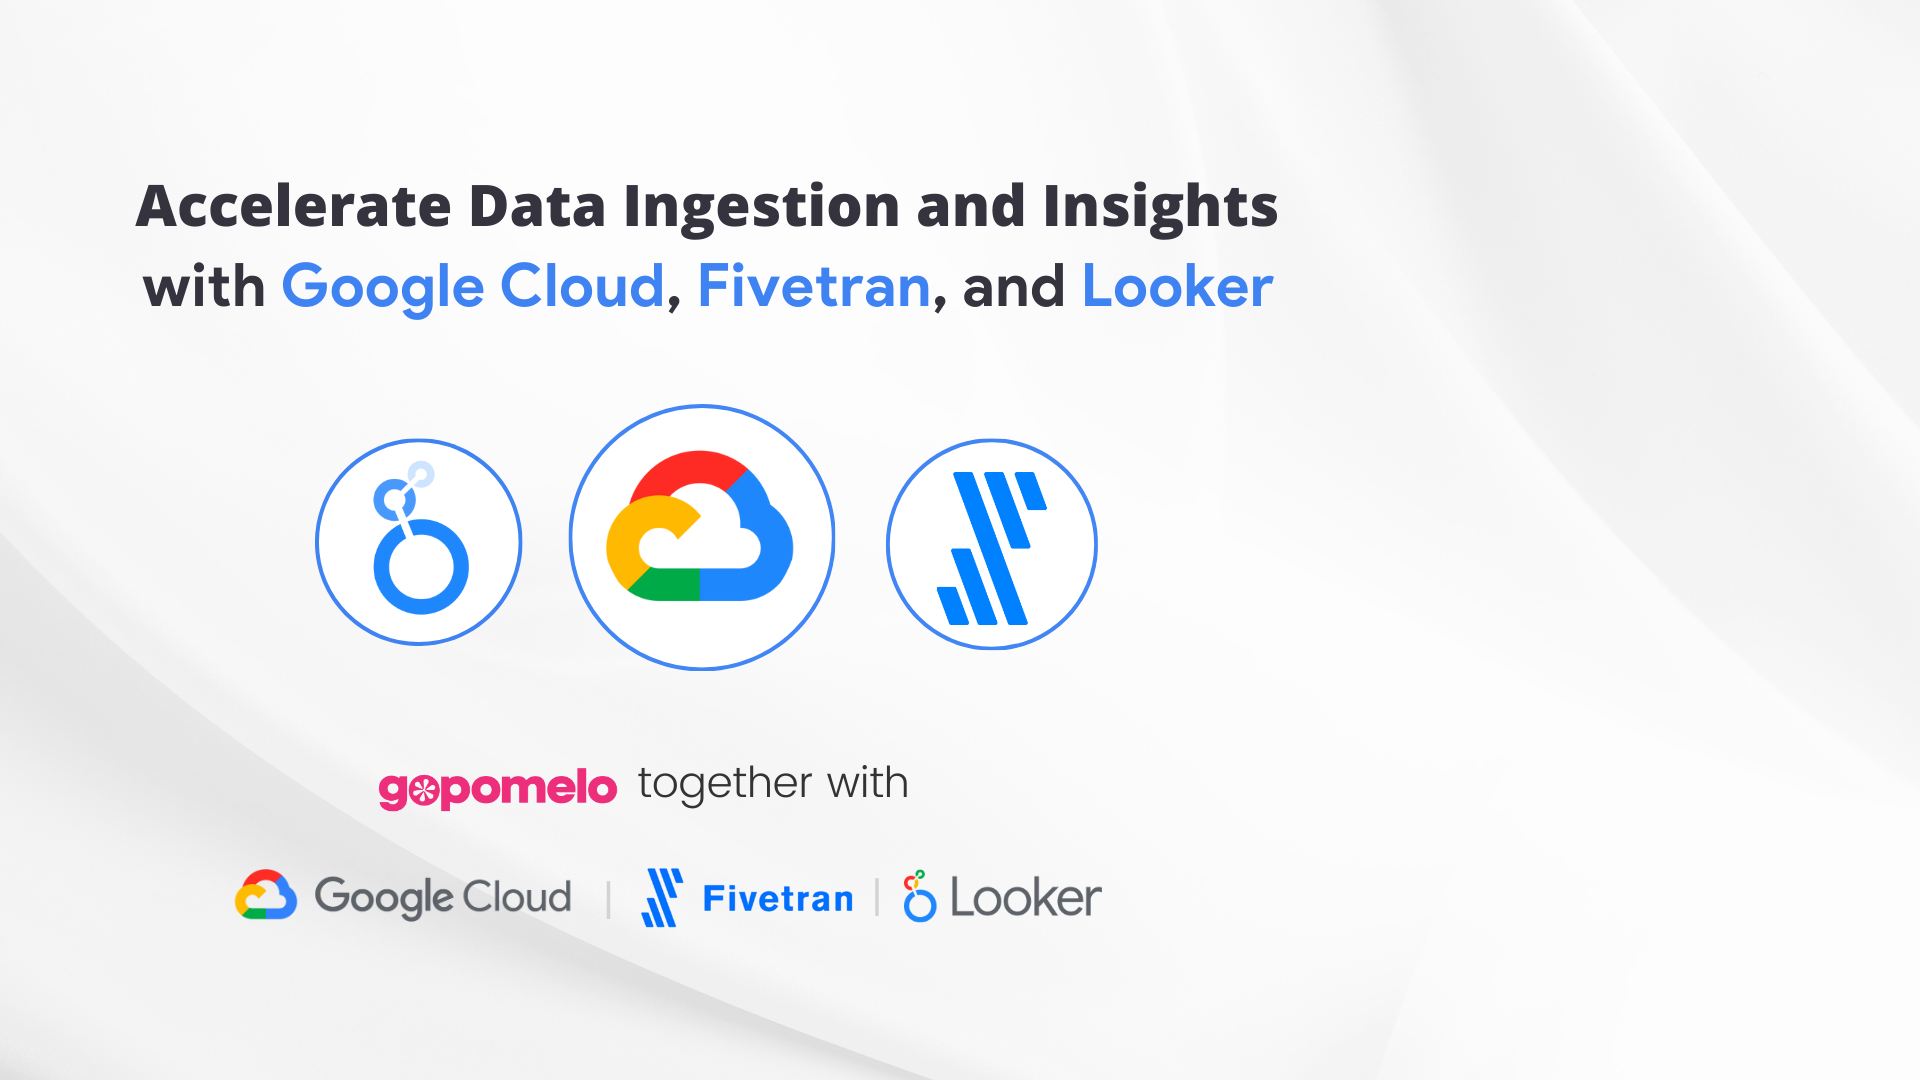 Accelerate Data Ingestion and Insights with GCP, Fivetran, and Looker